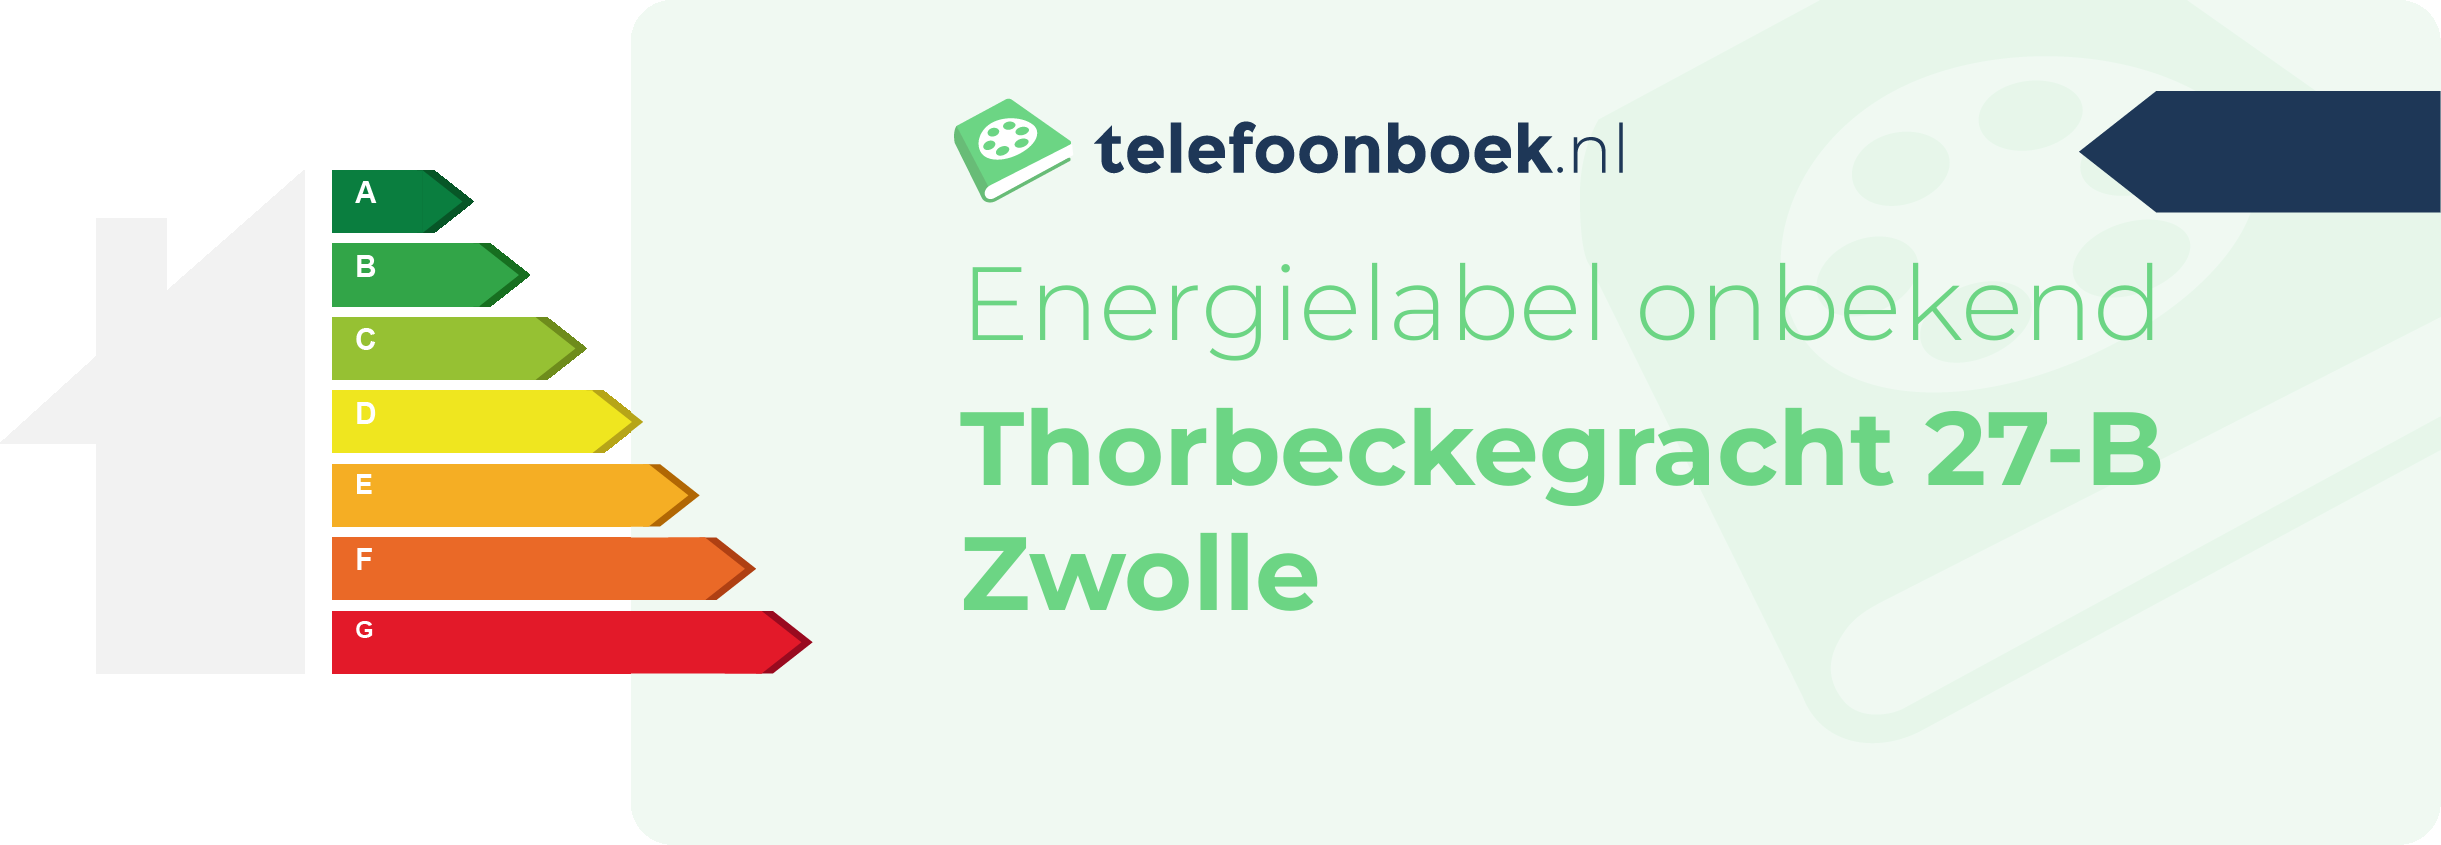 Energielabel Thorbeckegracht 27-B Zwolle